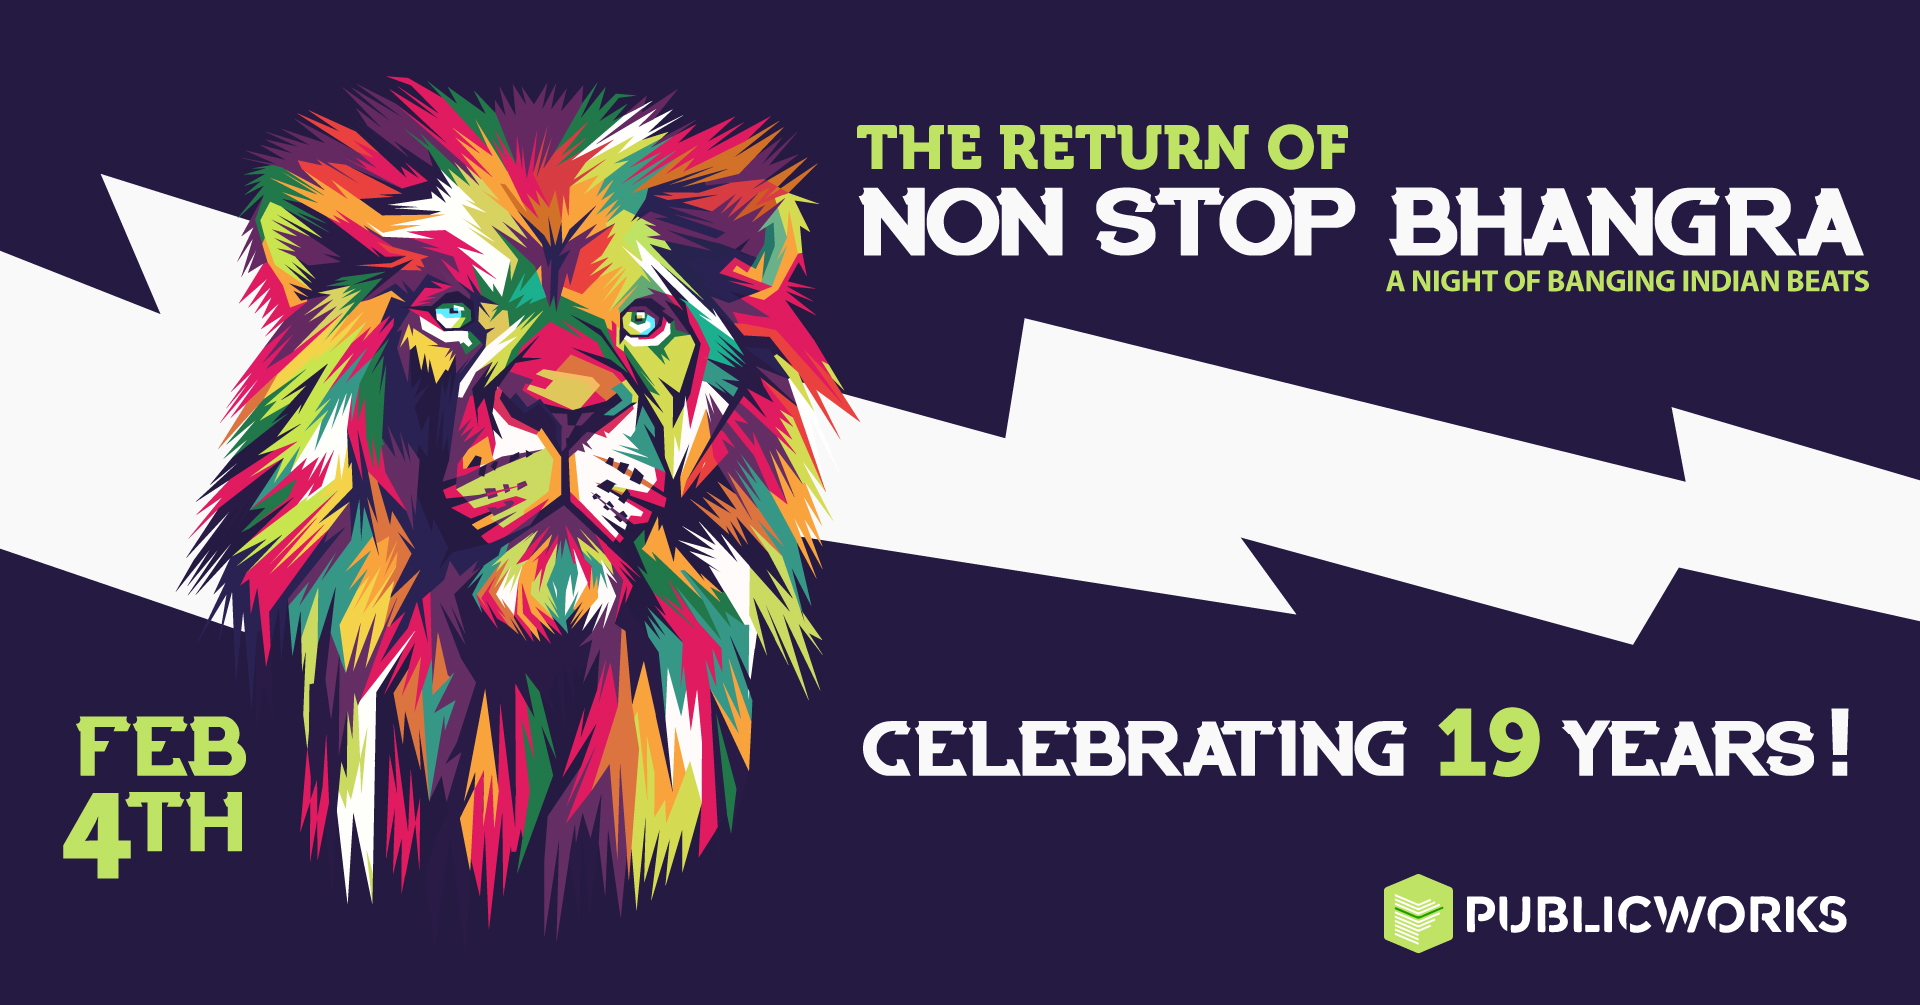 Non Stop Bhangra Returns To Public Works to Celebrate 19 Years, San Francisco, California, United States